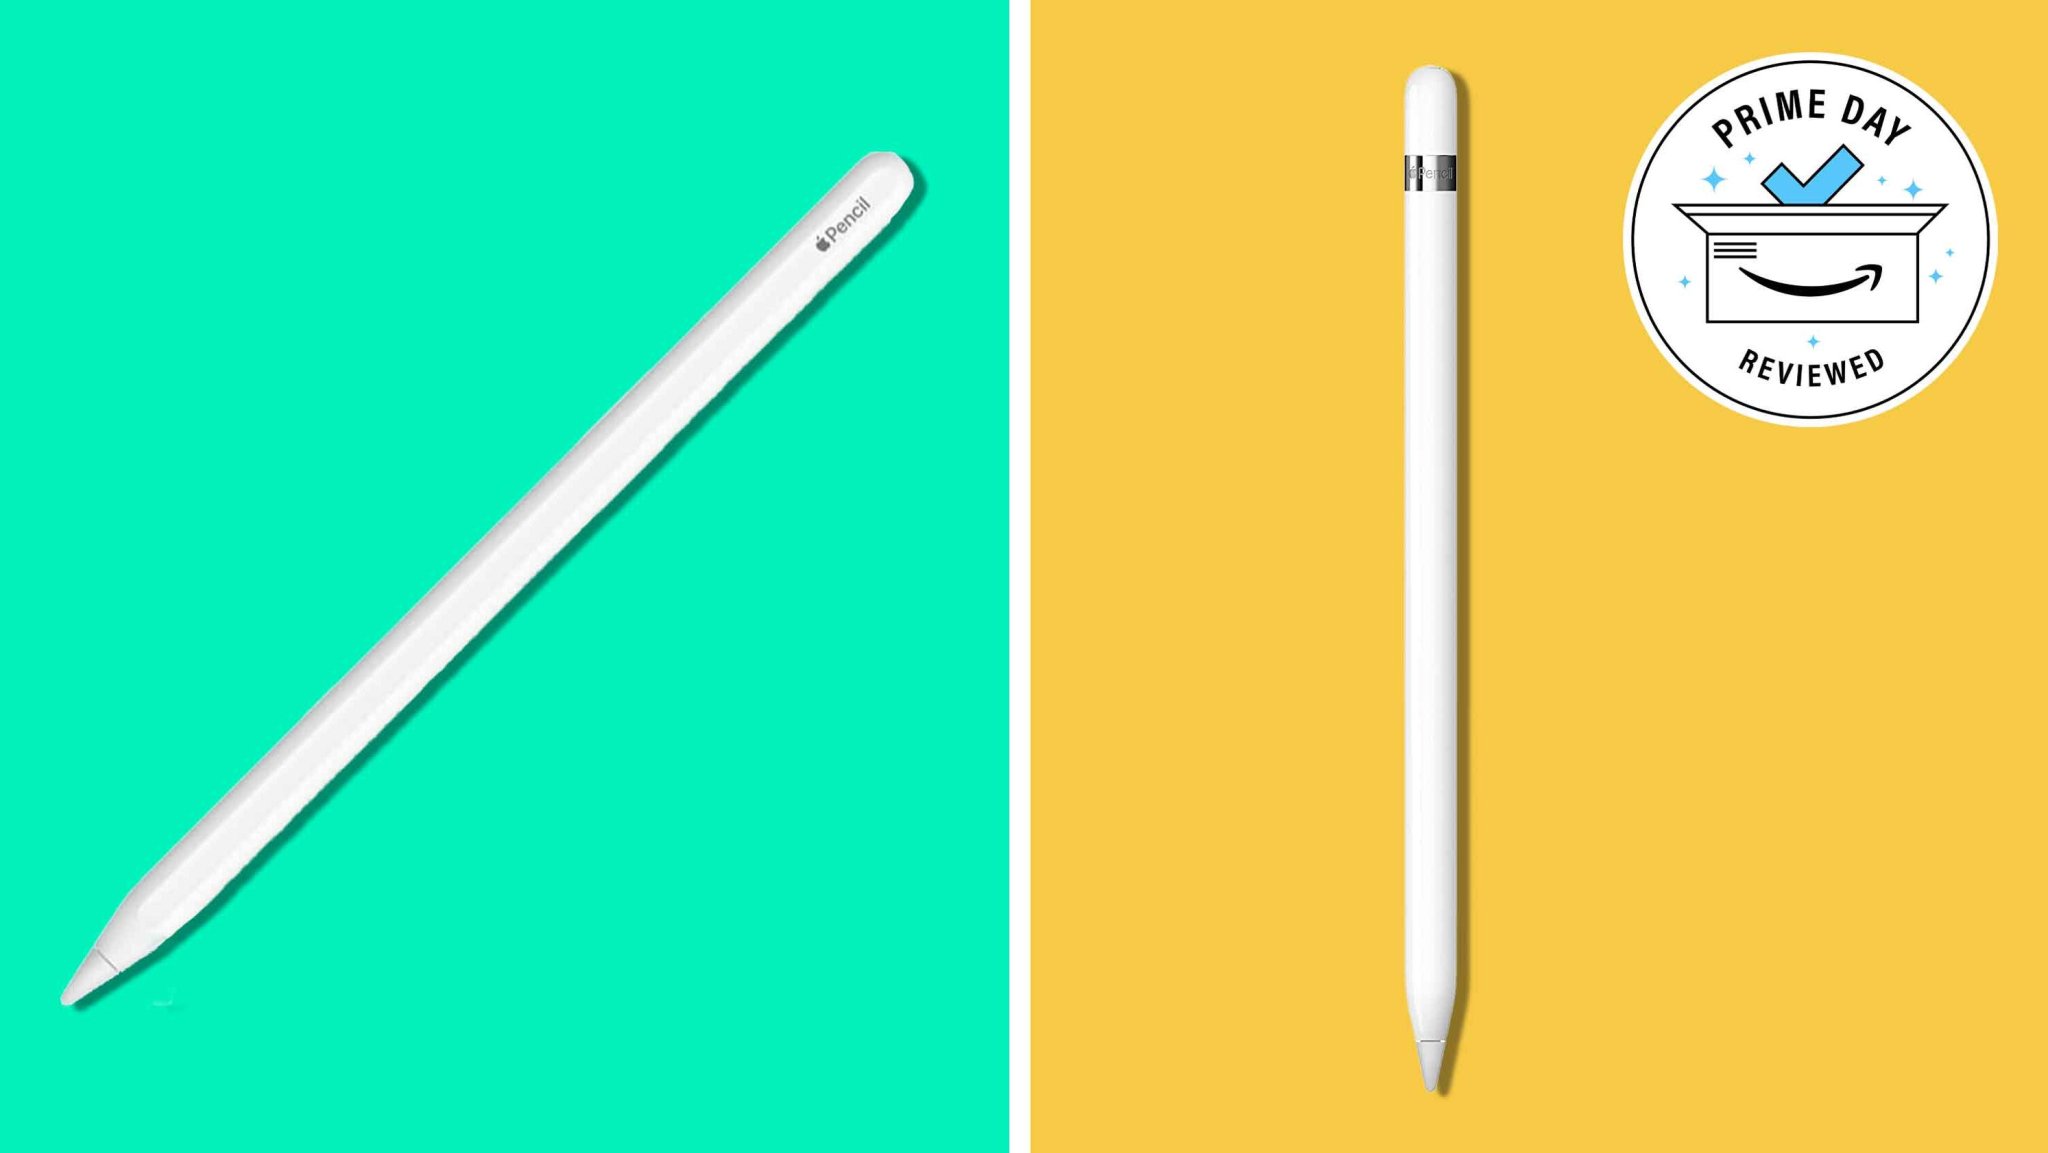 The Apple Pencil 1 is 20% off ahead of Amazon Prime Day and works with our favorite tablet